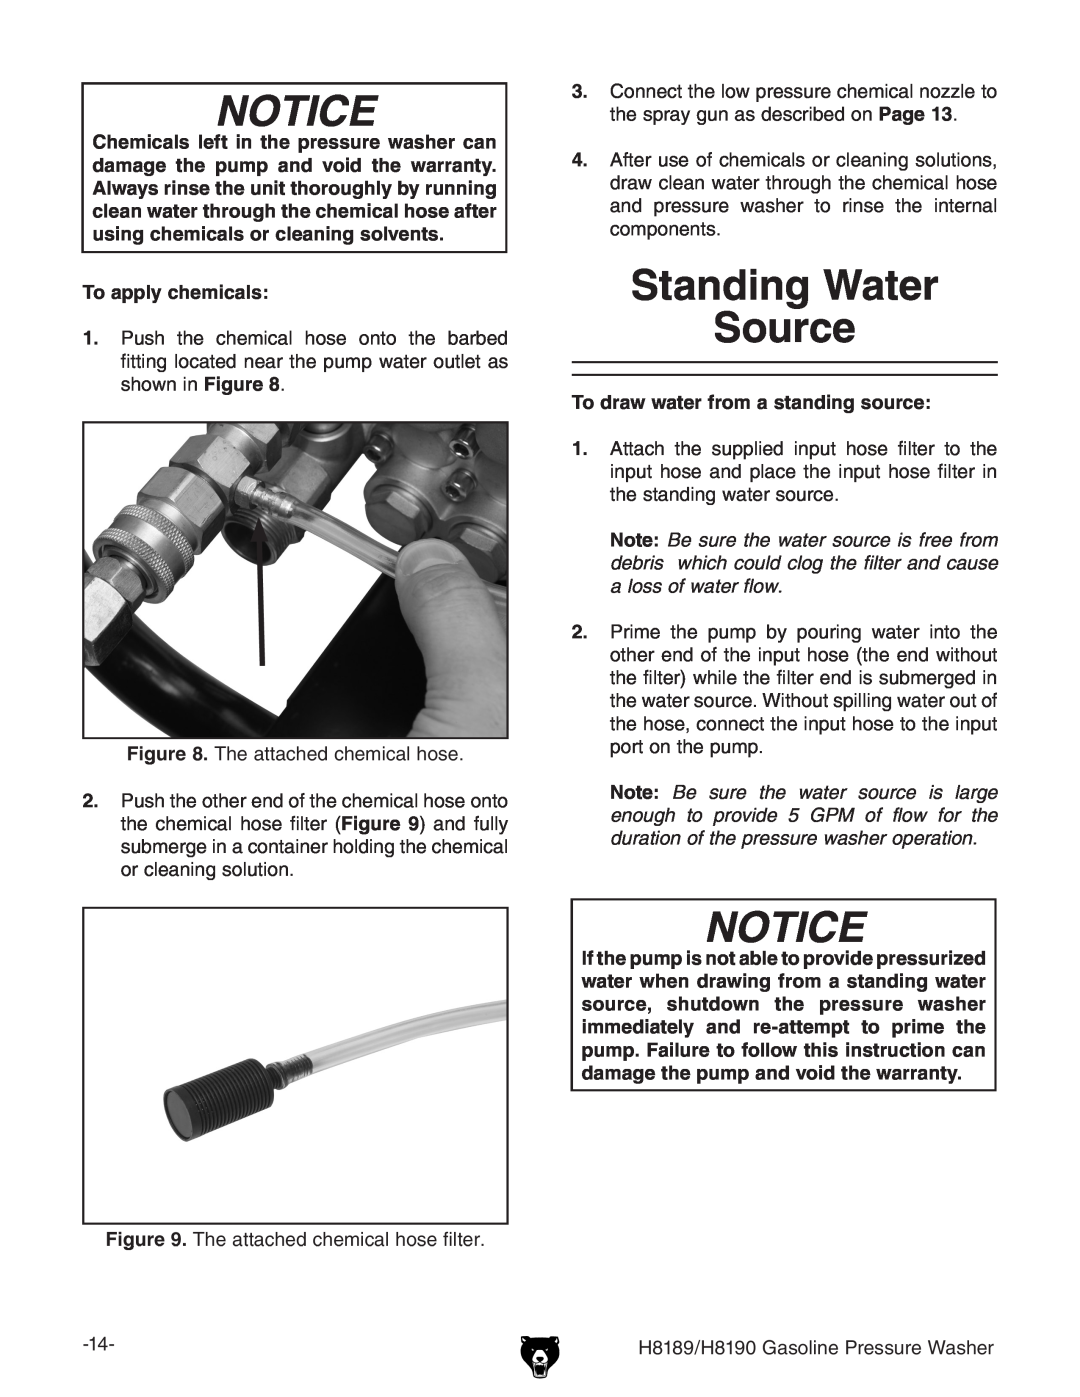 Grizzly H8189/H8190 owner manual Standing Water Source, Notice, To apply chemicals, To draw water from a standing source 